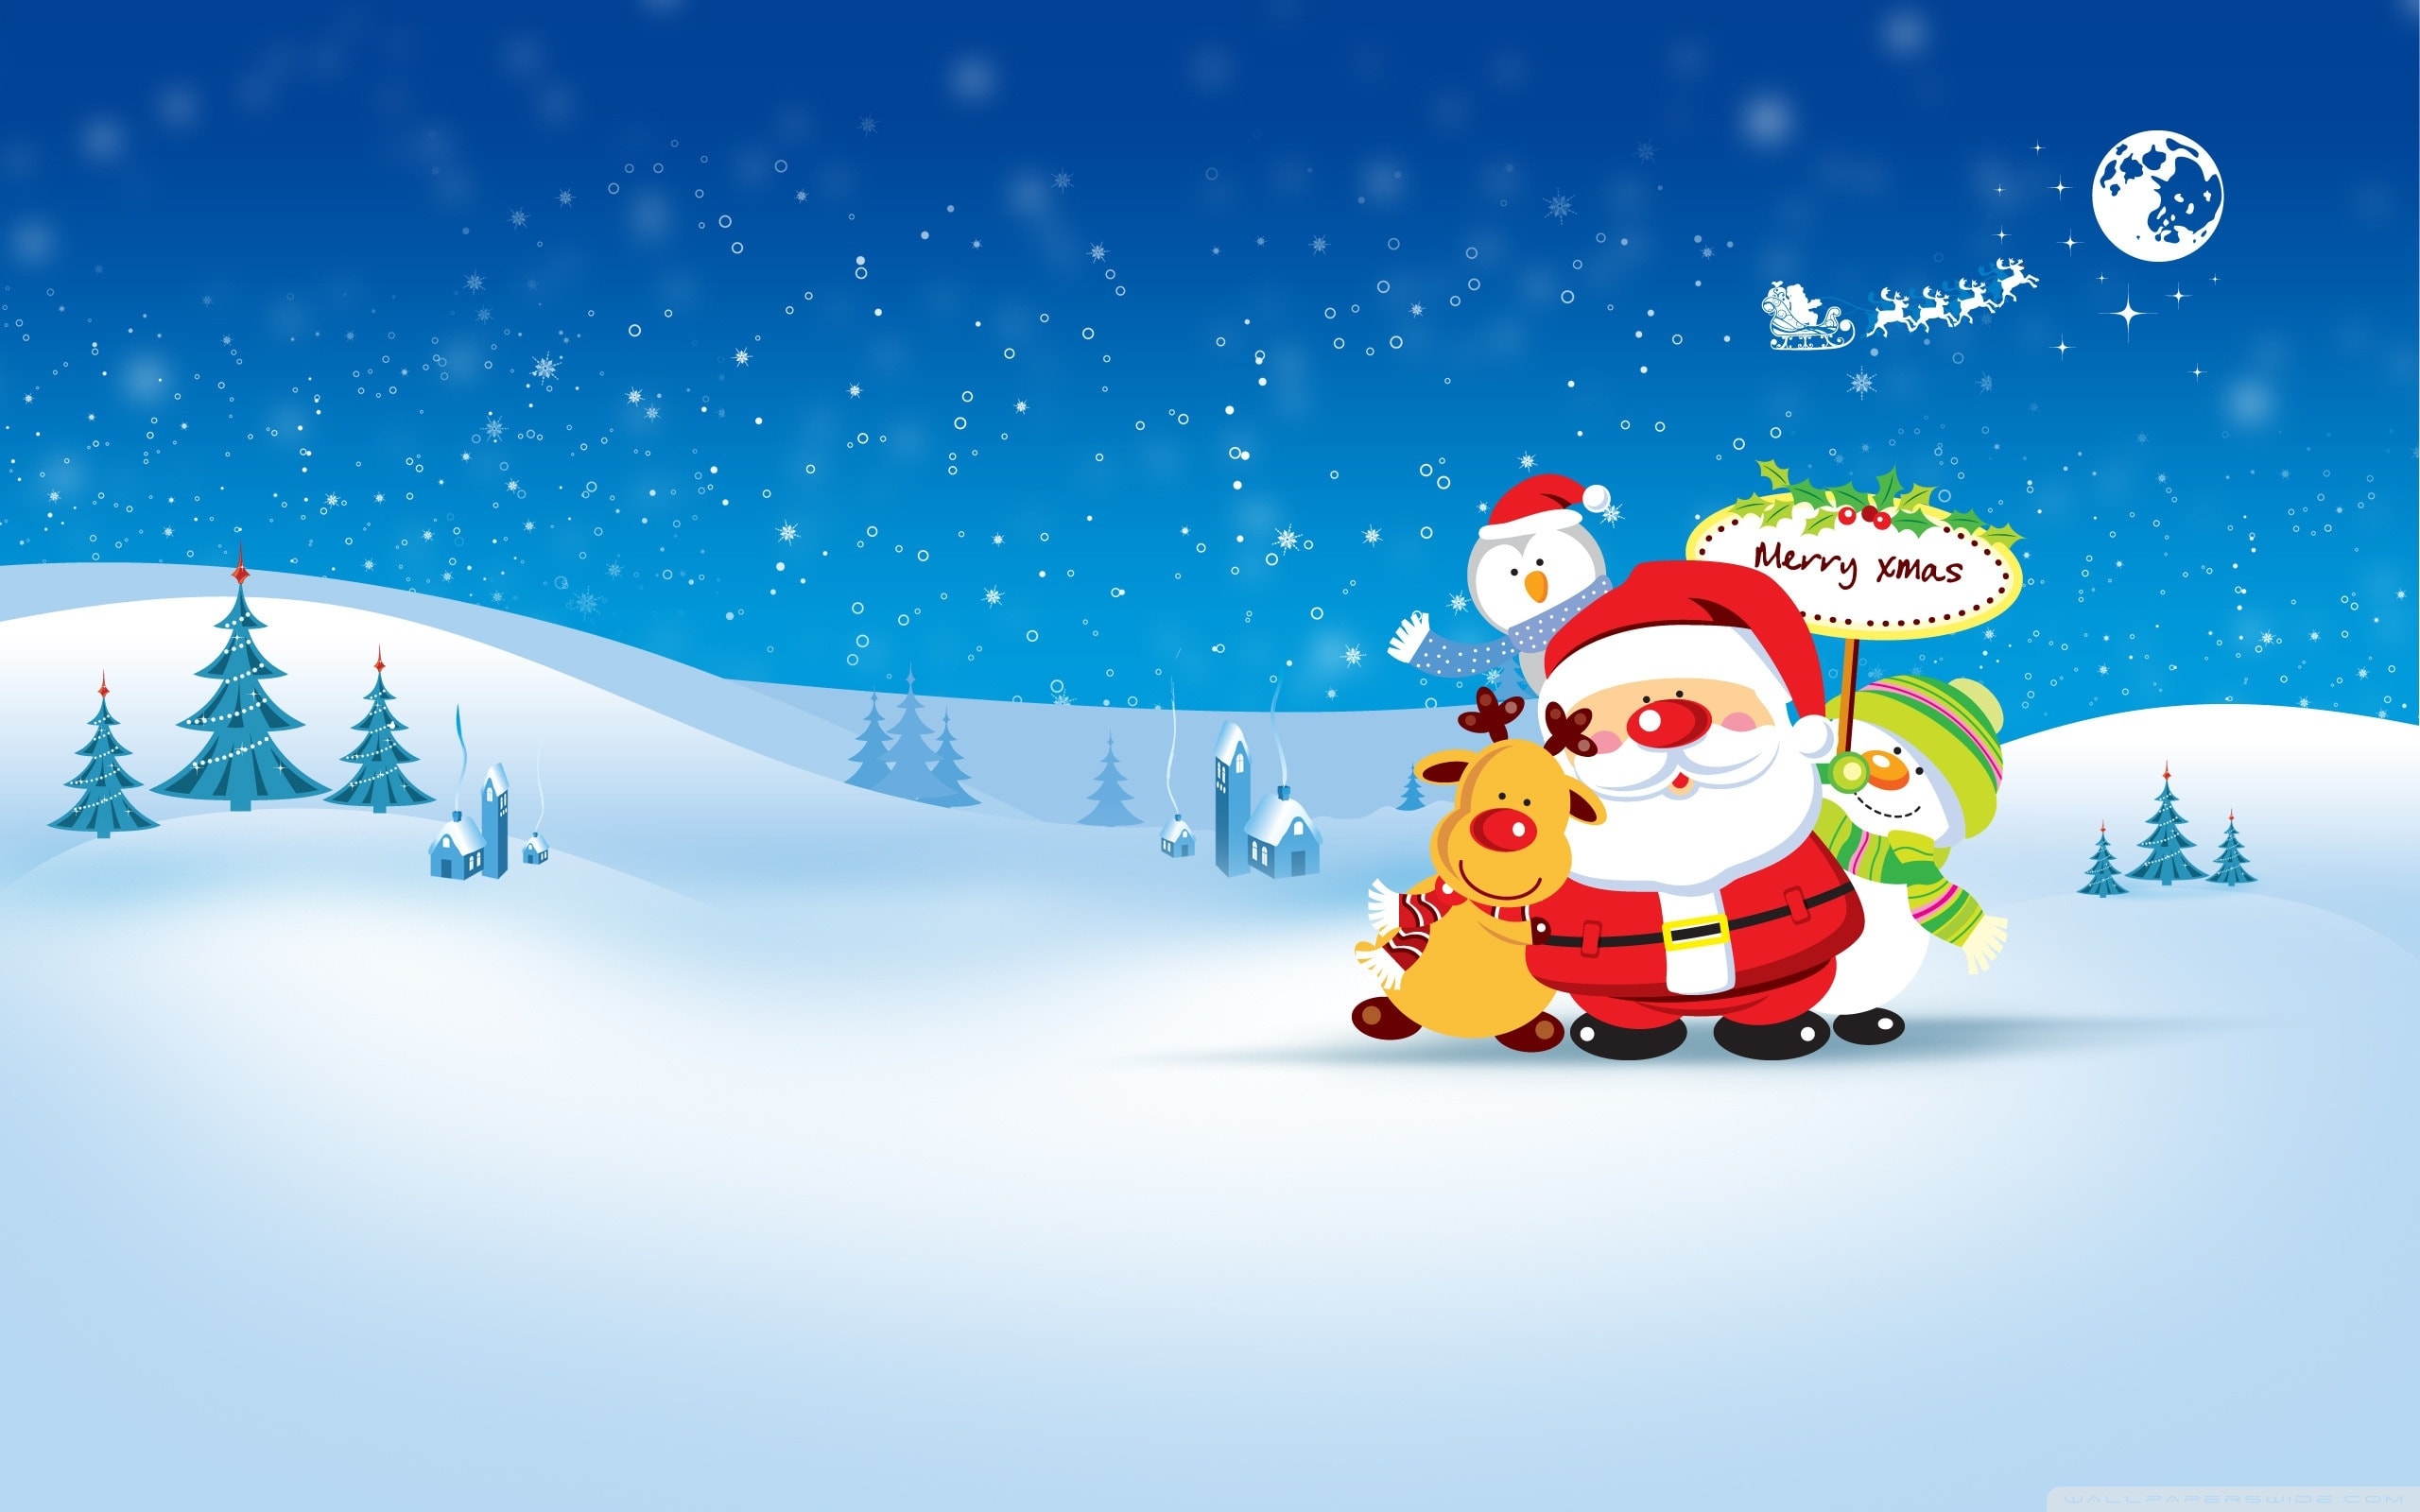 Merry Christmas Santa Claus Winter Wallpaper And Stock